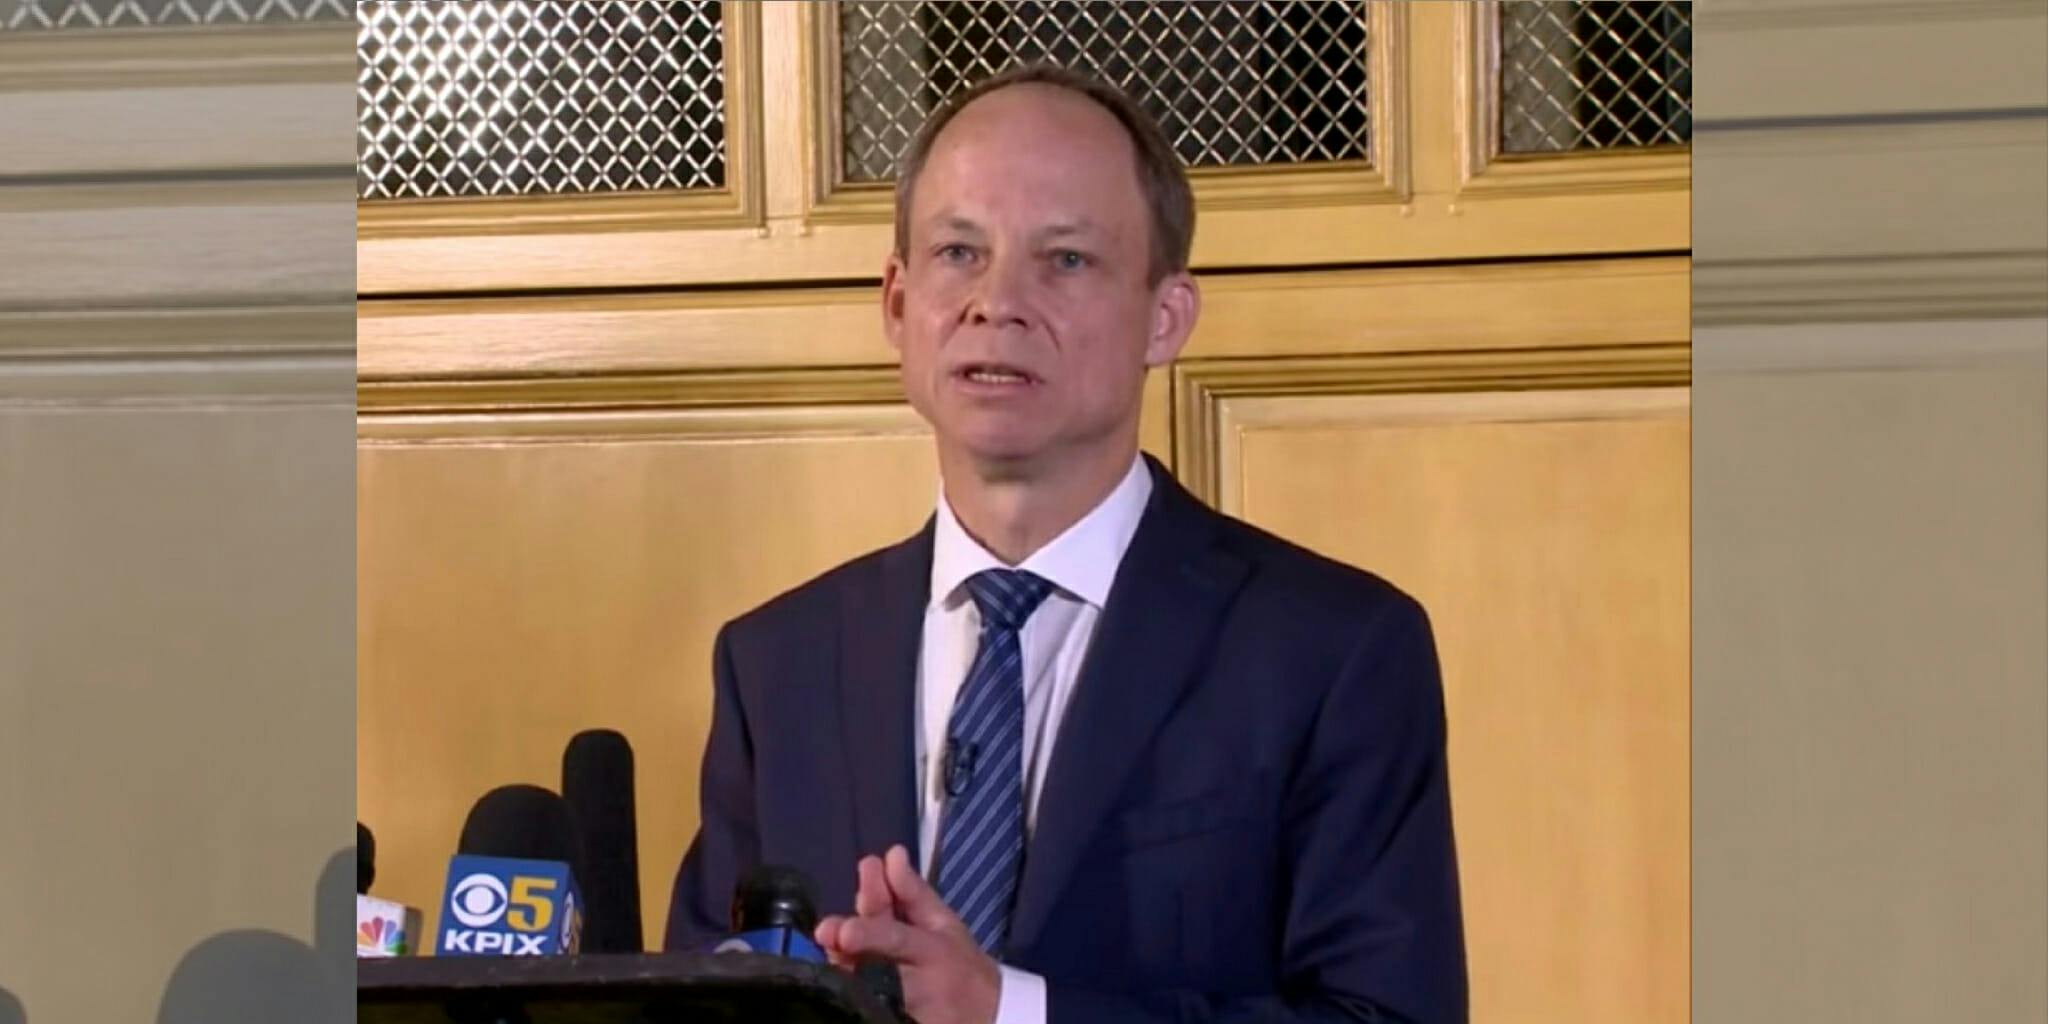 Judge Aaron Persky, who is up for a recall vote in June.